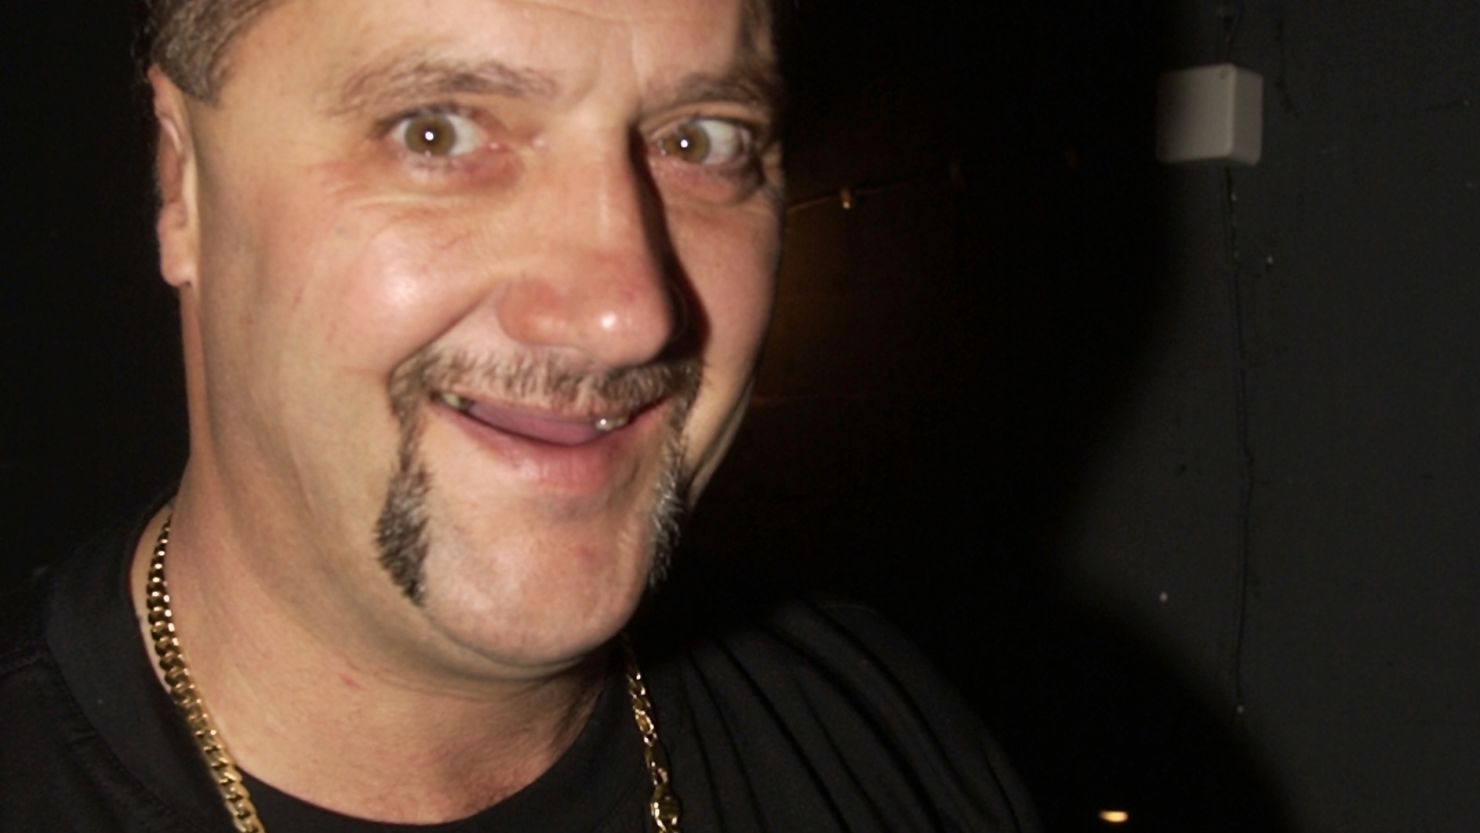 Ex-criminal Mark "Chopper" Read pictured at the Enmore Theatre in Sydney, Australia back in 2001.